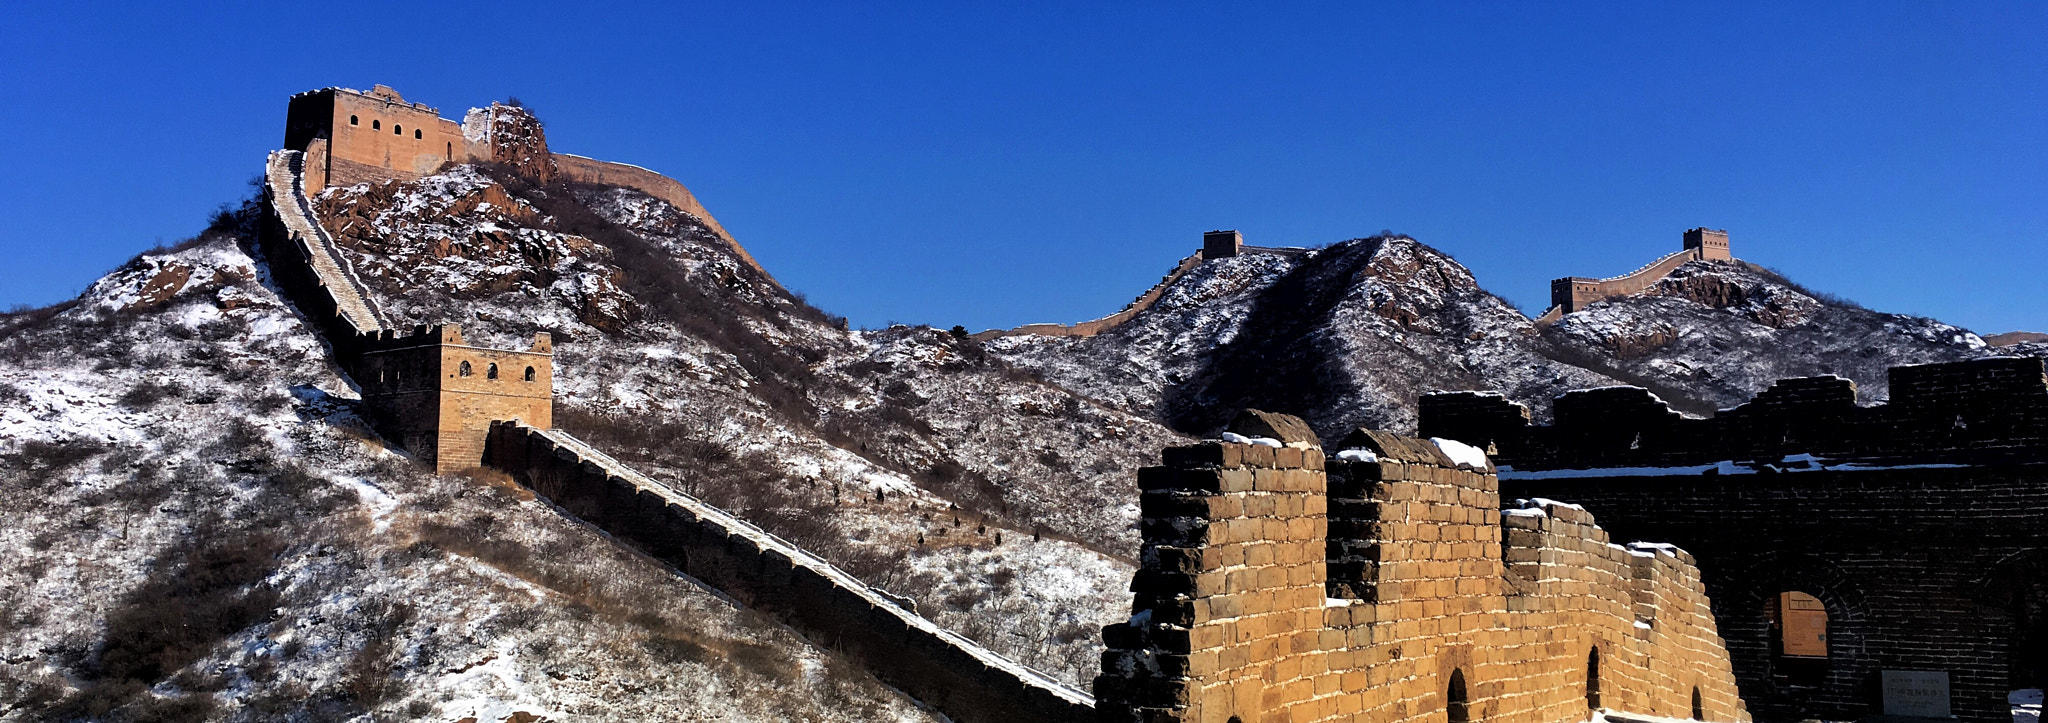 Jag.gr 645 PRO Mk III for iOS sample photo. The great wall photography